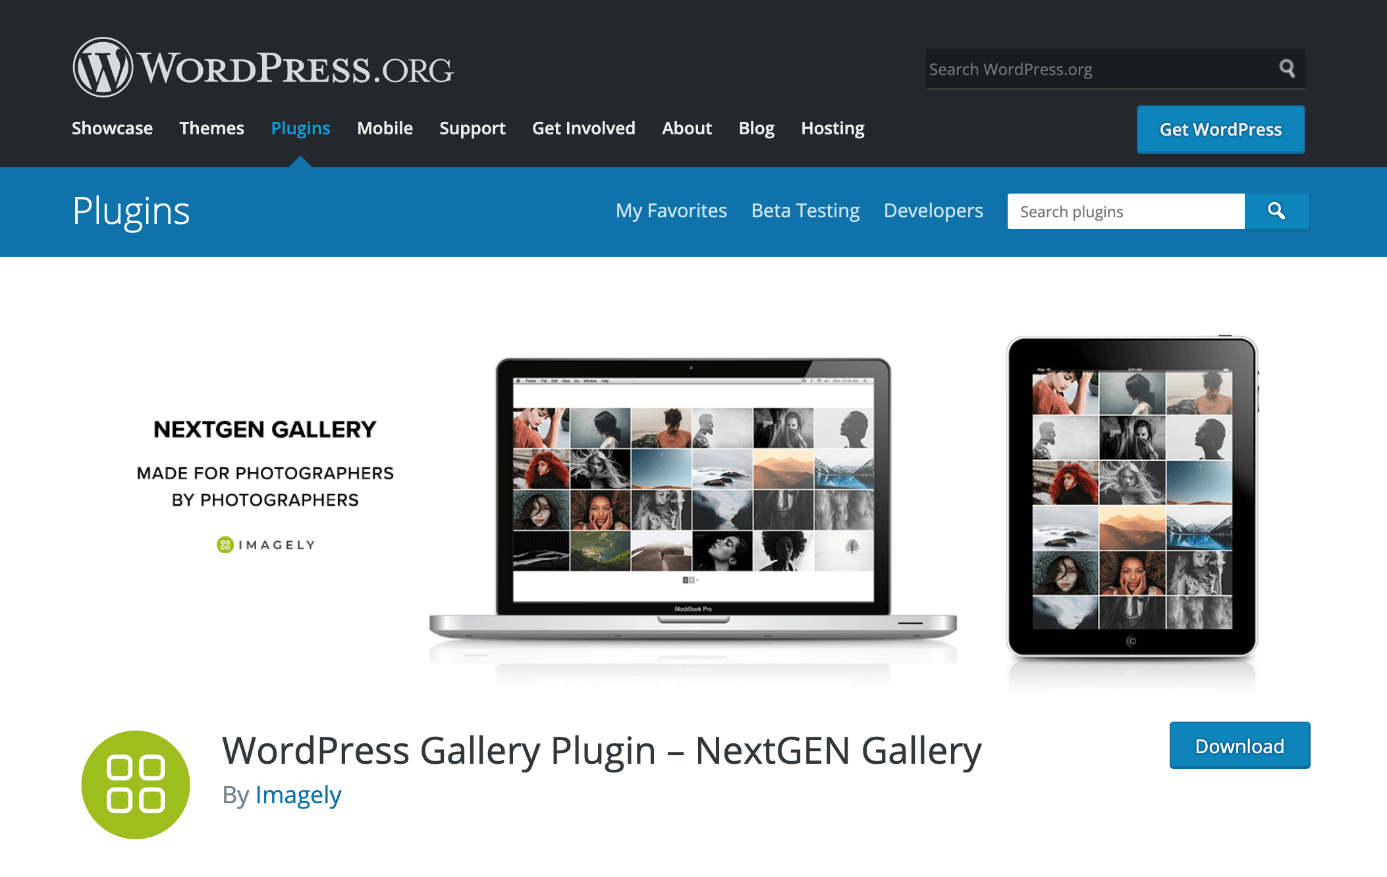 NextGEN Gallery is available for download at wordpress.org